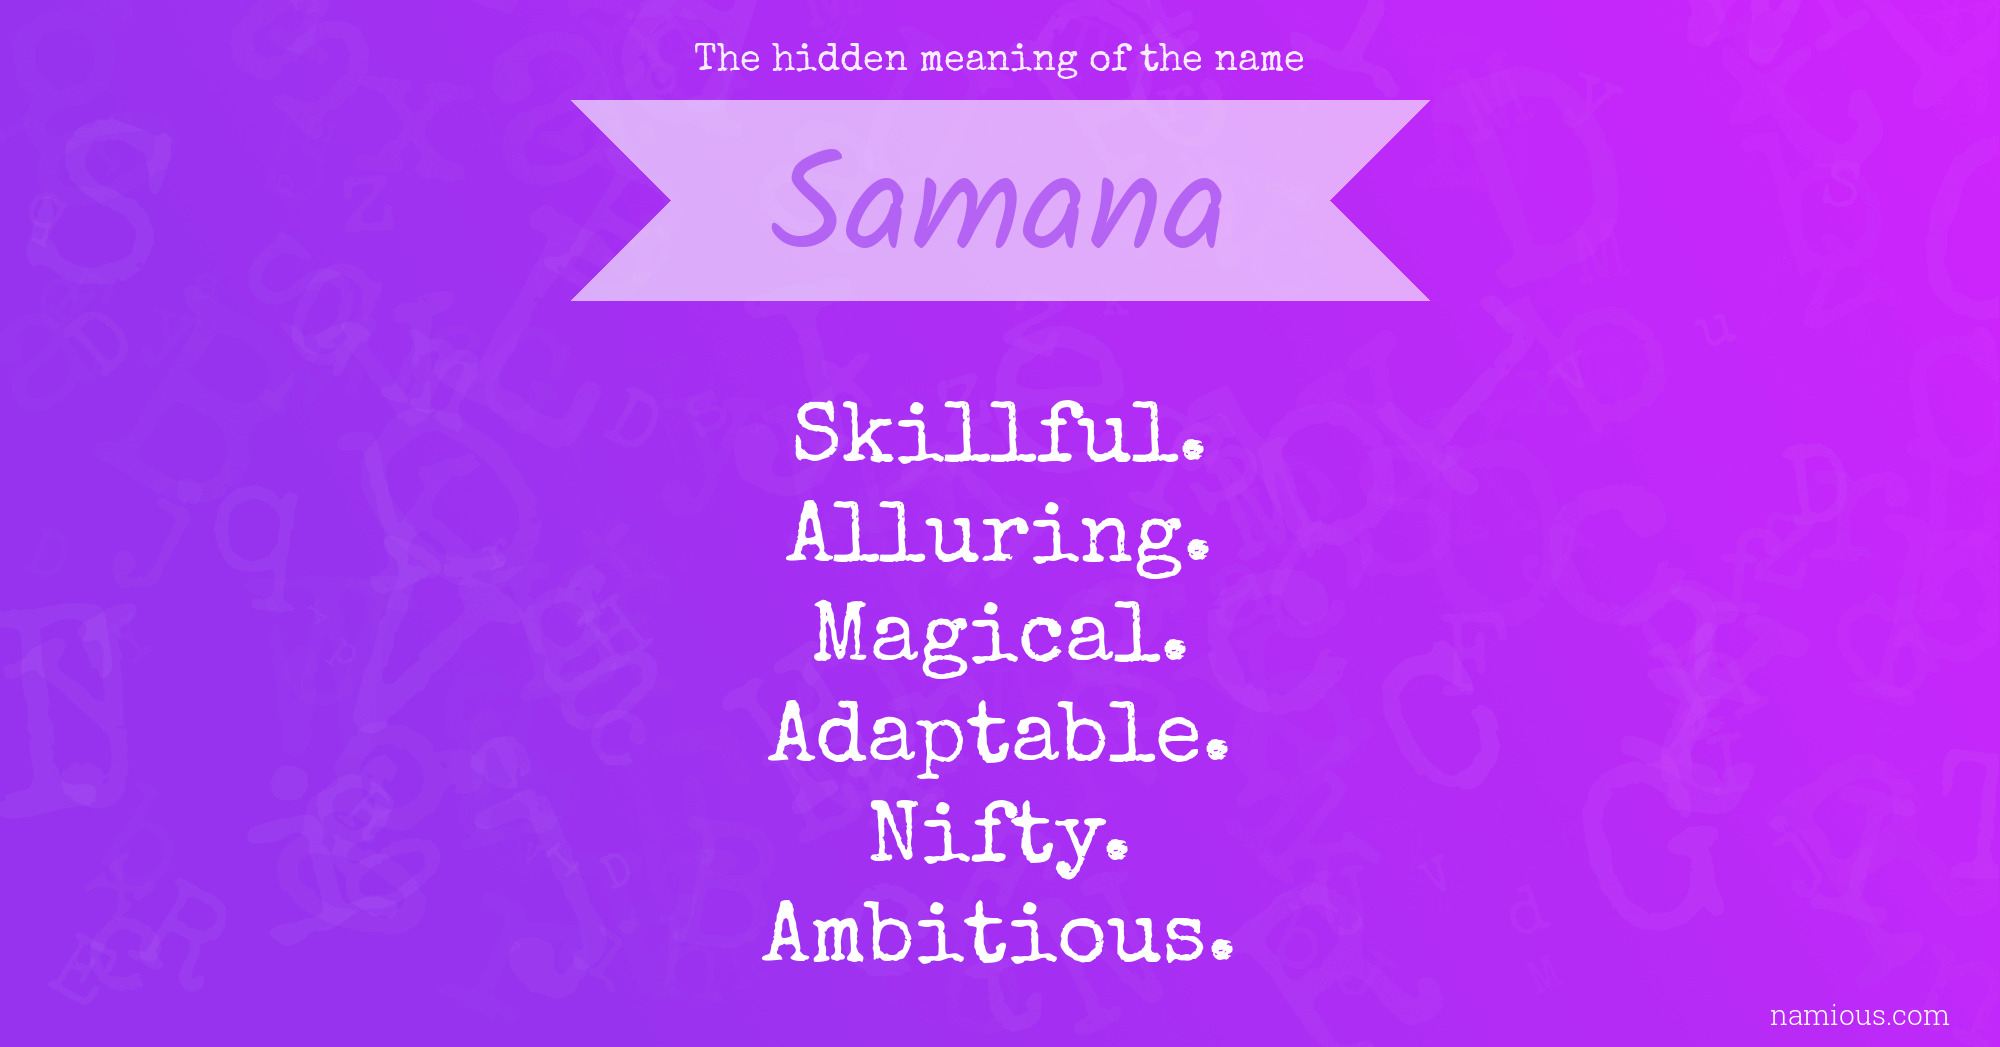 The hidden meaning of the name Samana